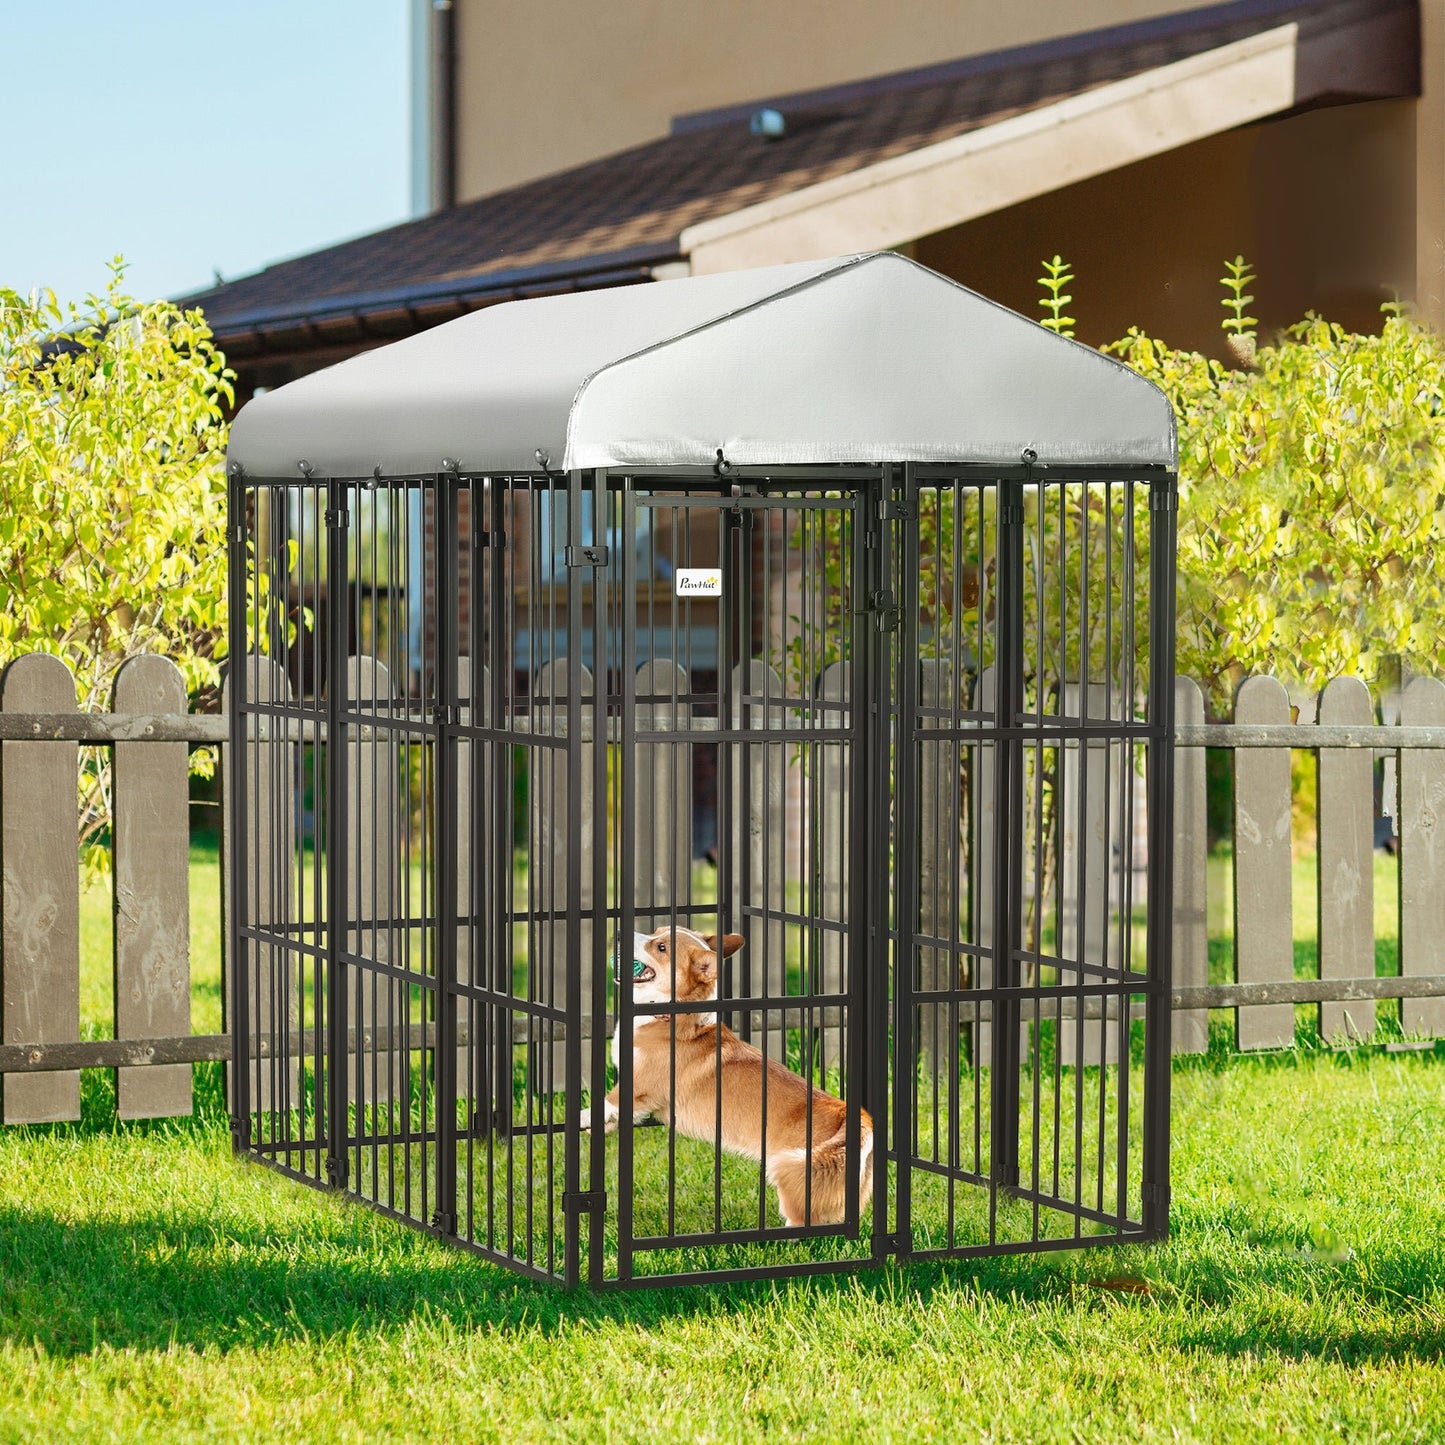 Outdoor and Garden-6' x 4' Dog Playpen, Outdoor Puppy Exercise Pen with Water-resistant UV Protection Canopy, Dog Run Enclosure for Large & Medium Dogs, Black - Outdoor Style Company